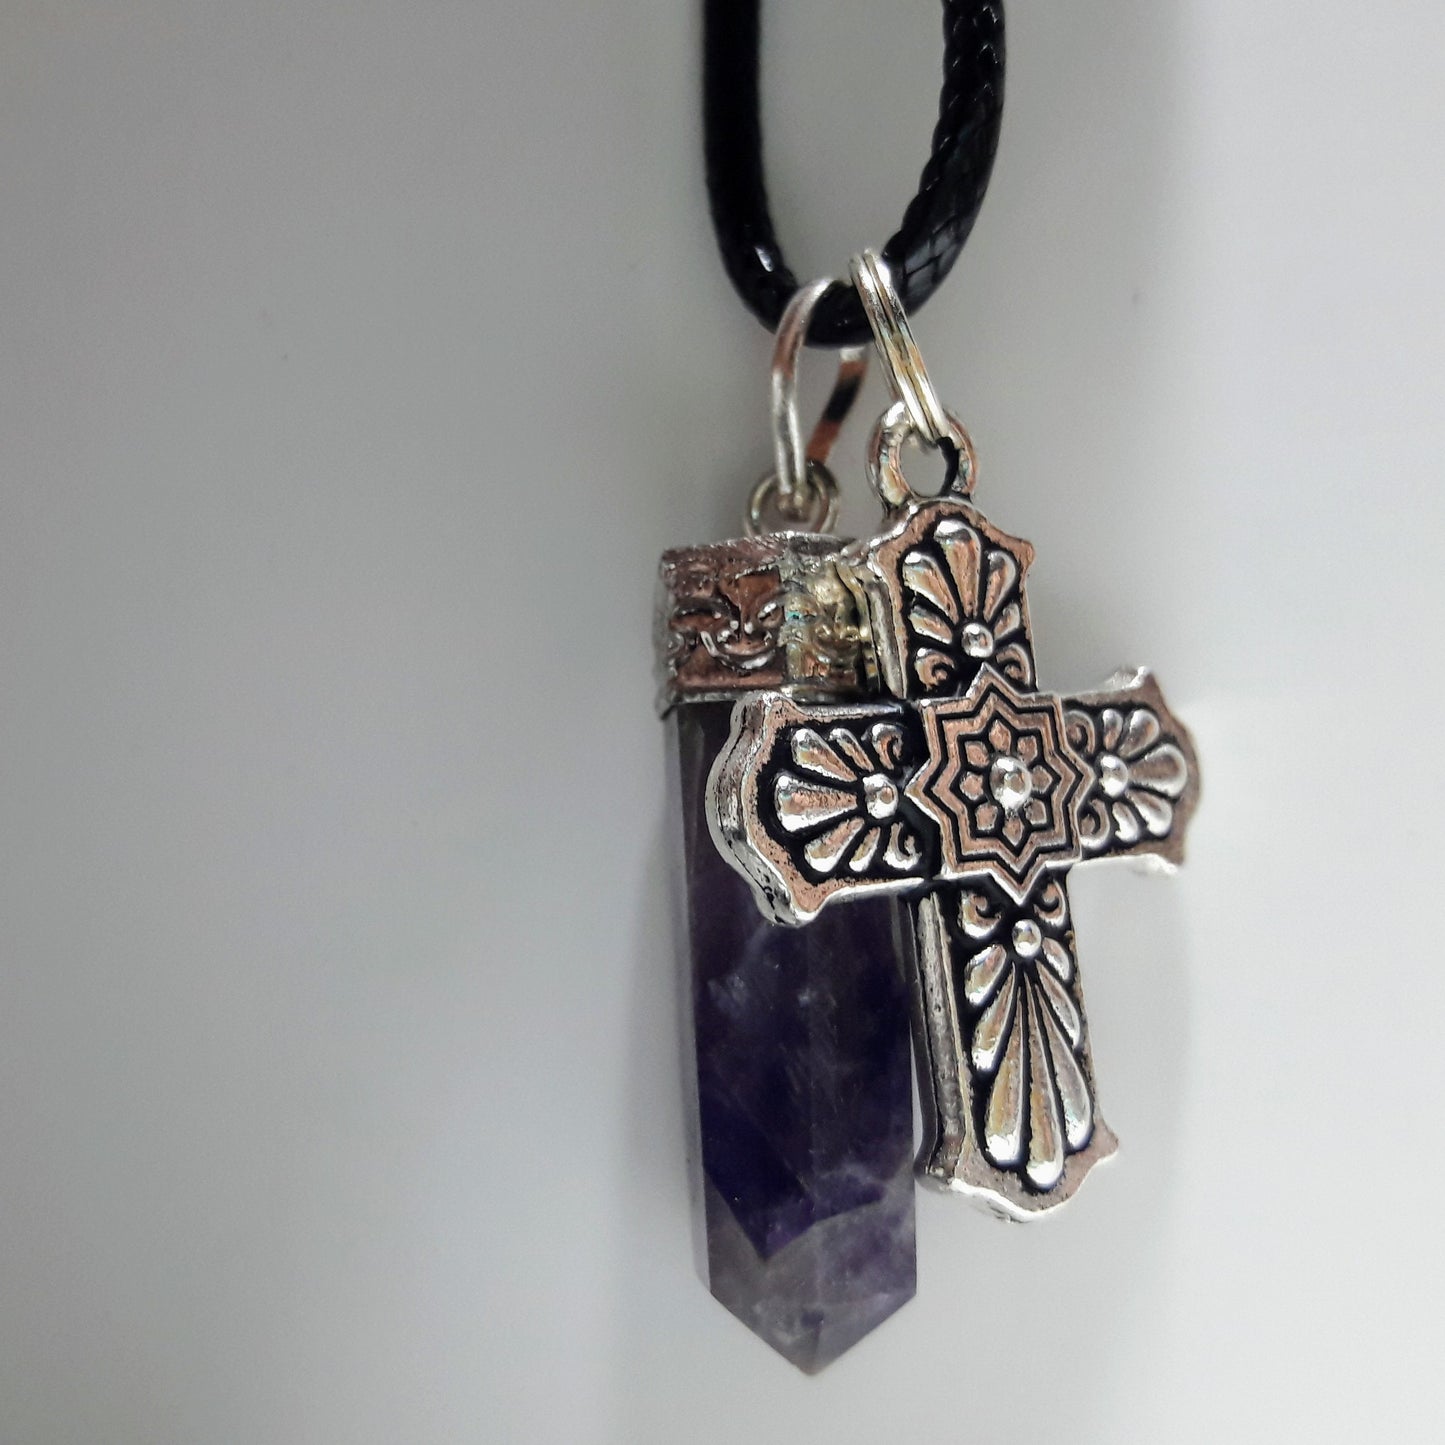 Natural Amethyst and Pewter Talavera Cross Pendant & Necklace Set